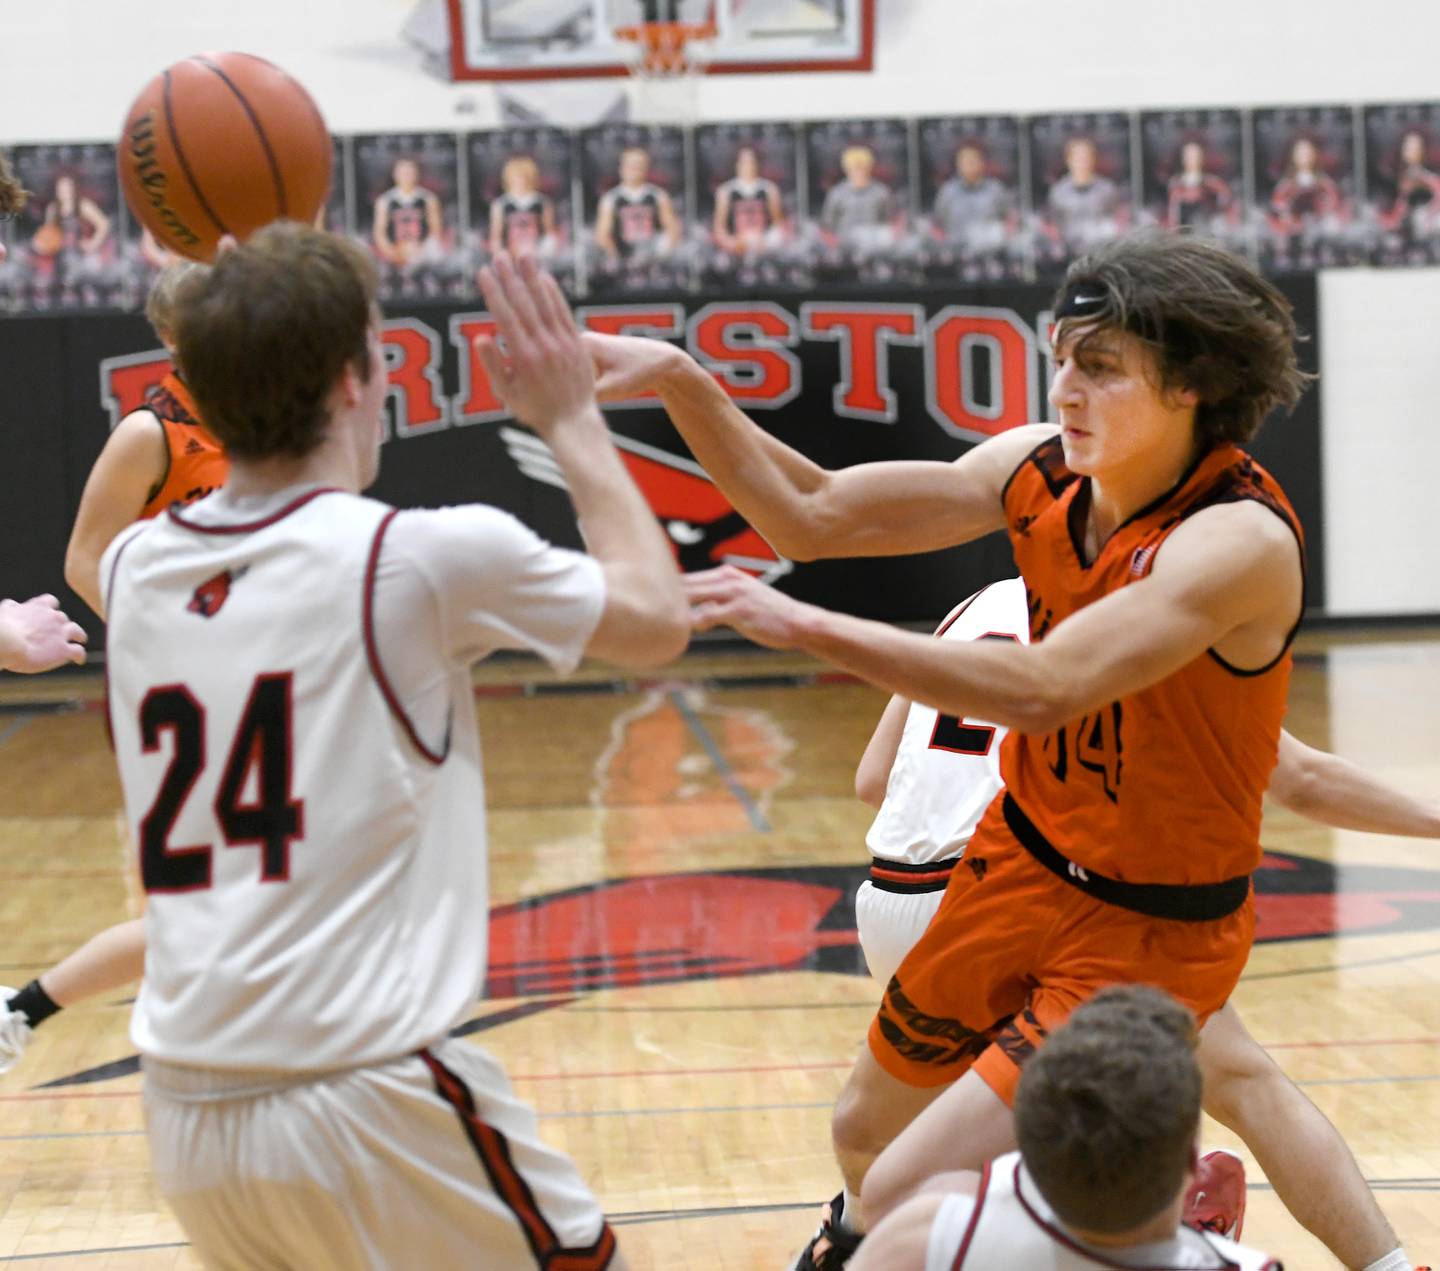 Milledgeville's Kacen Johnson (14) passes the ball during a Friday, Jan. 27 NUIC game against Forreston.